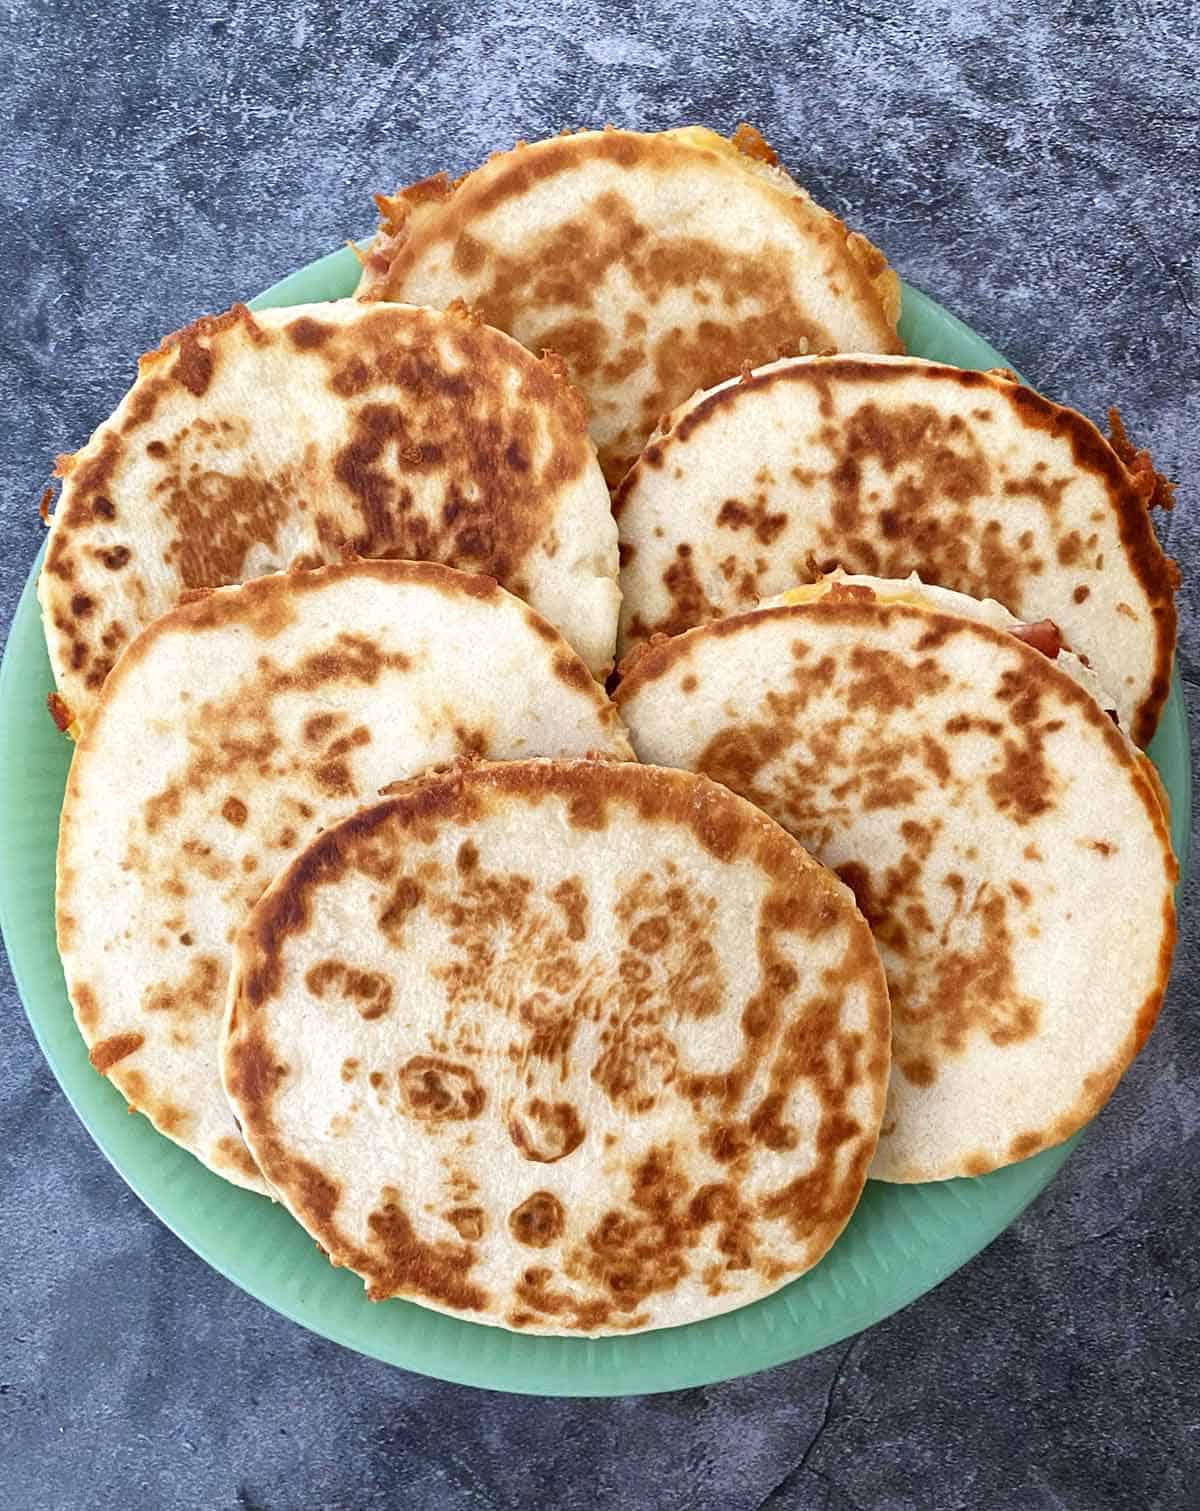 Six golden brown, just-cooked mini quesadillas on a green serving plate.